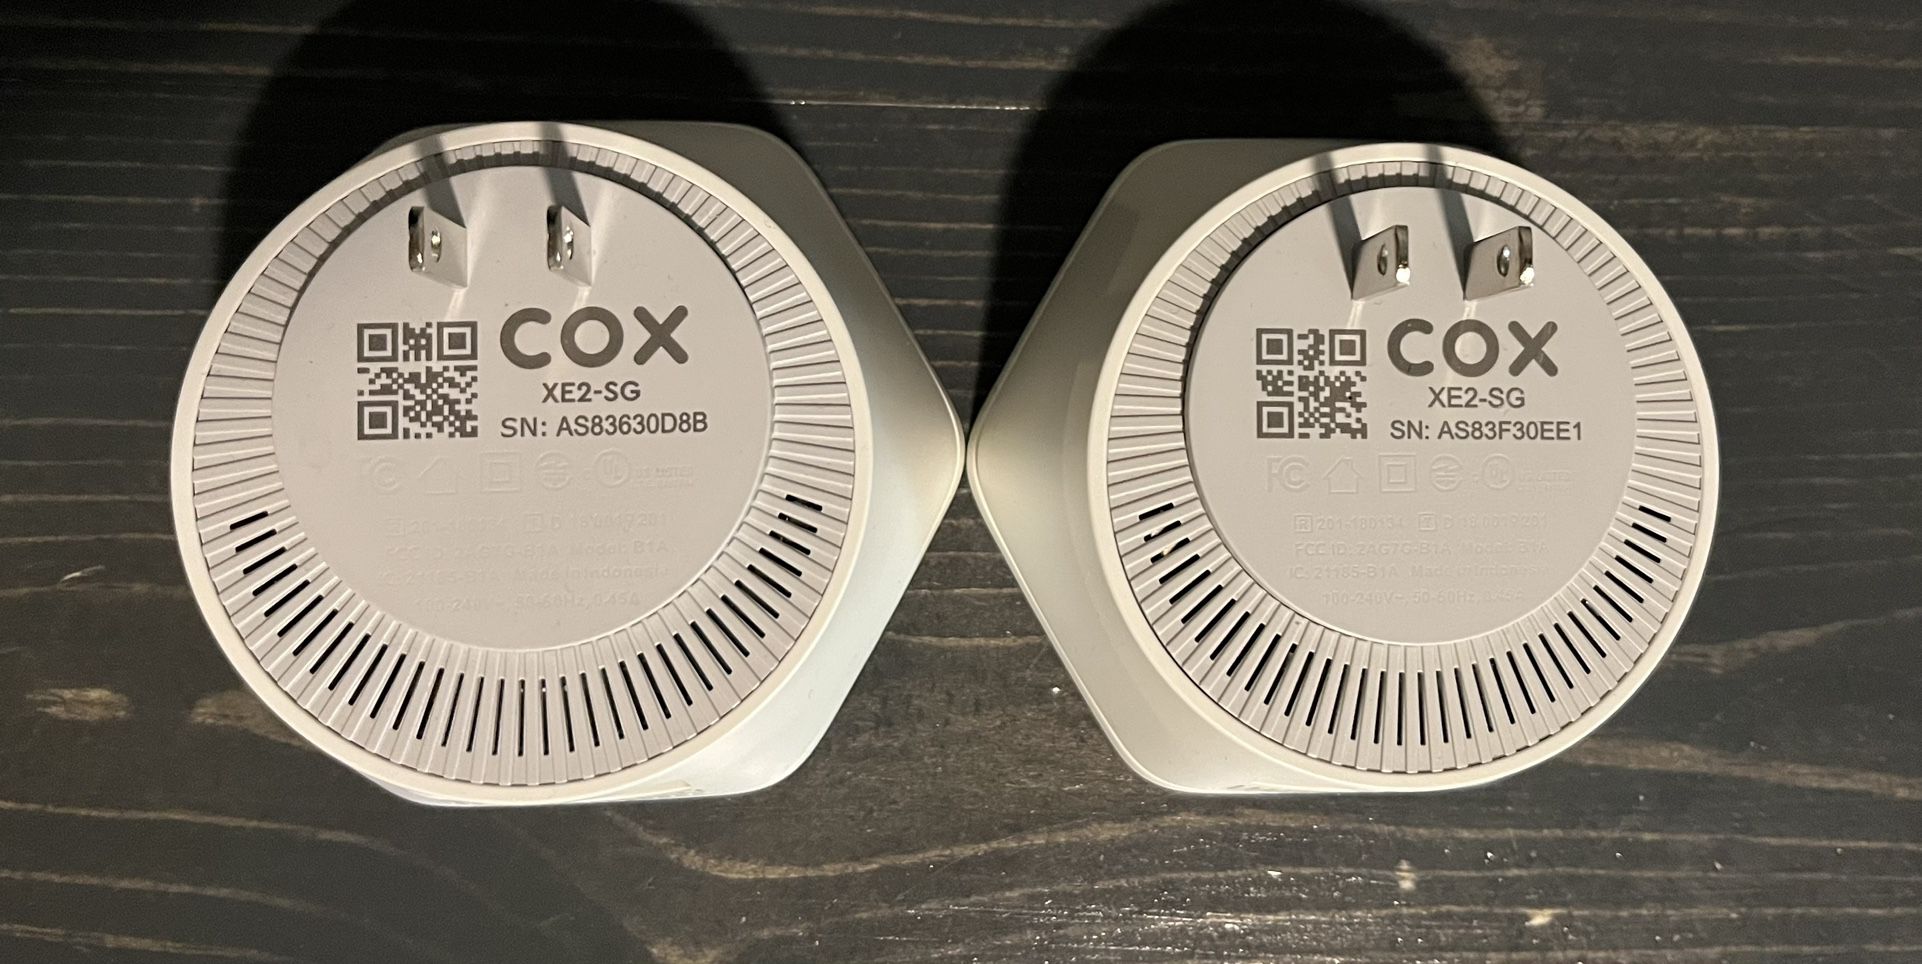 Cox Wi-Fi Extender Pods